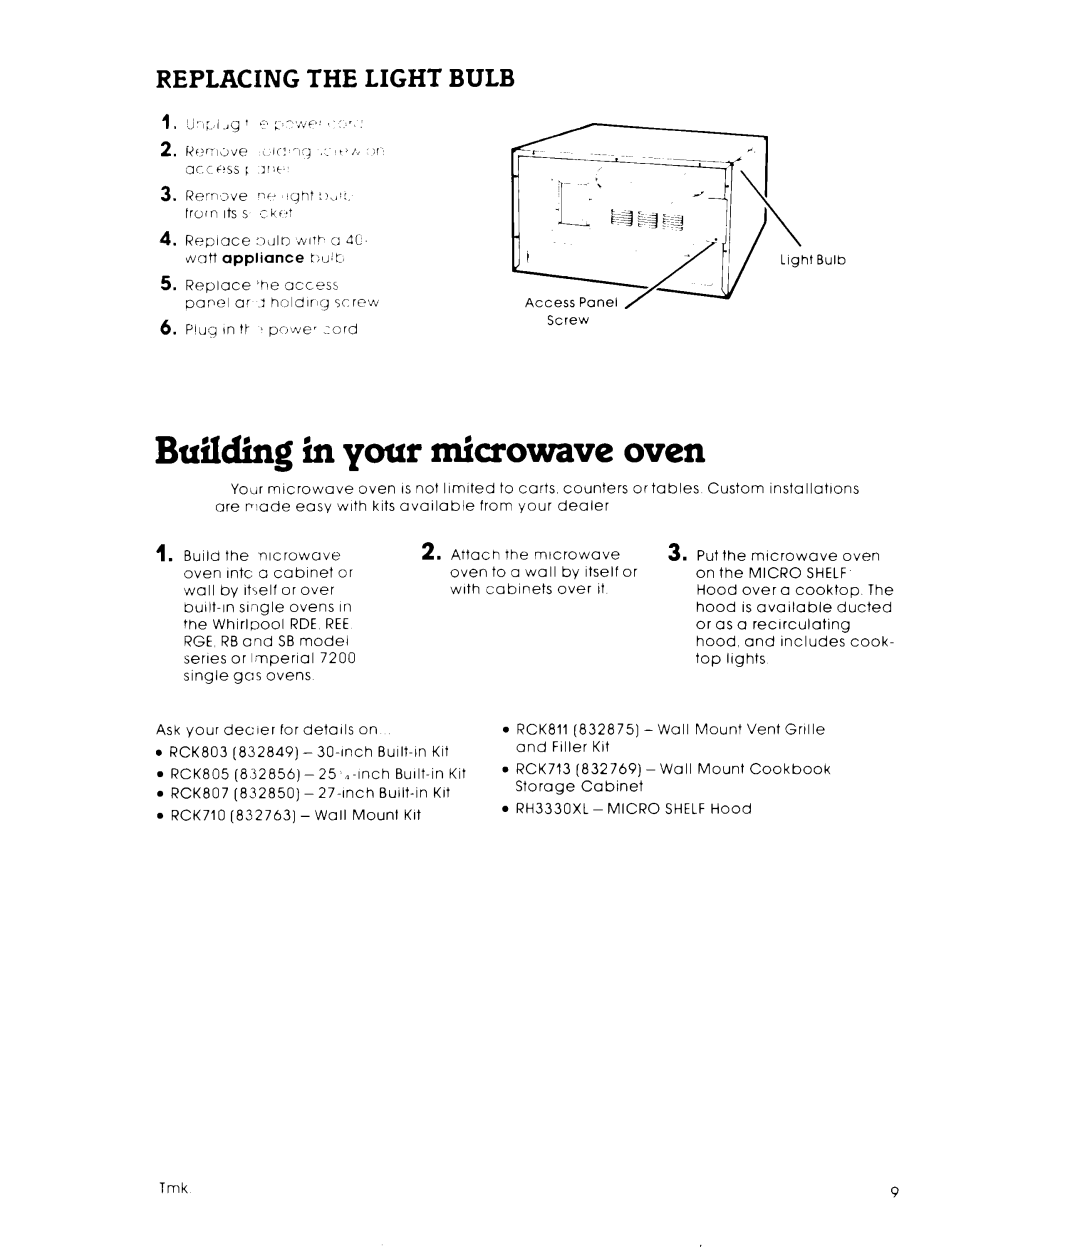 Whirlpool MW82OOXL manual Building in your microwave oven, Replacing The Light Bulb 